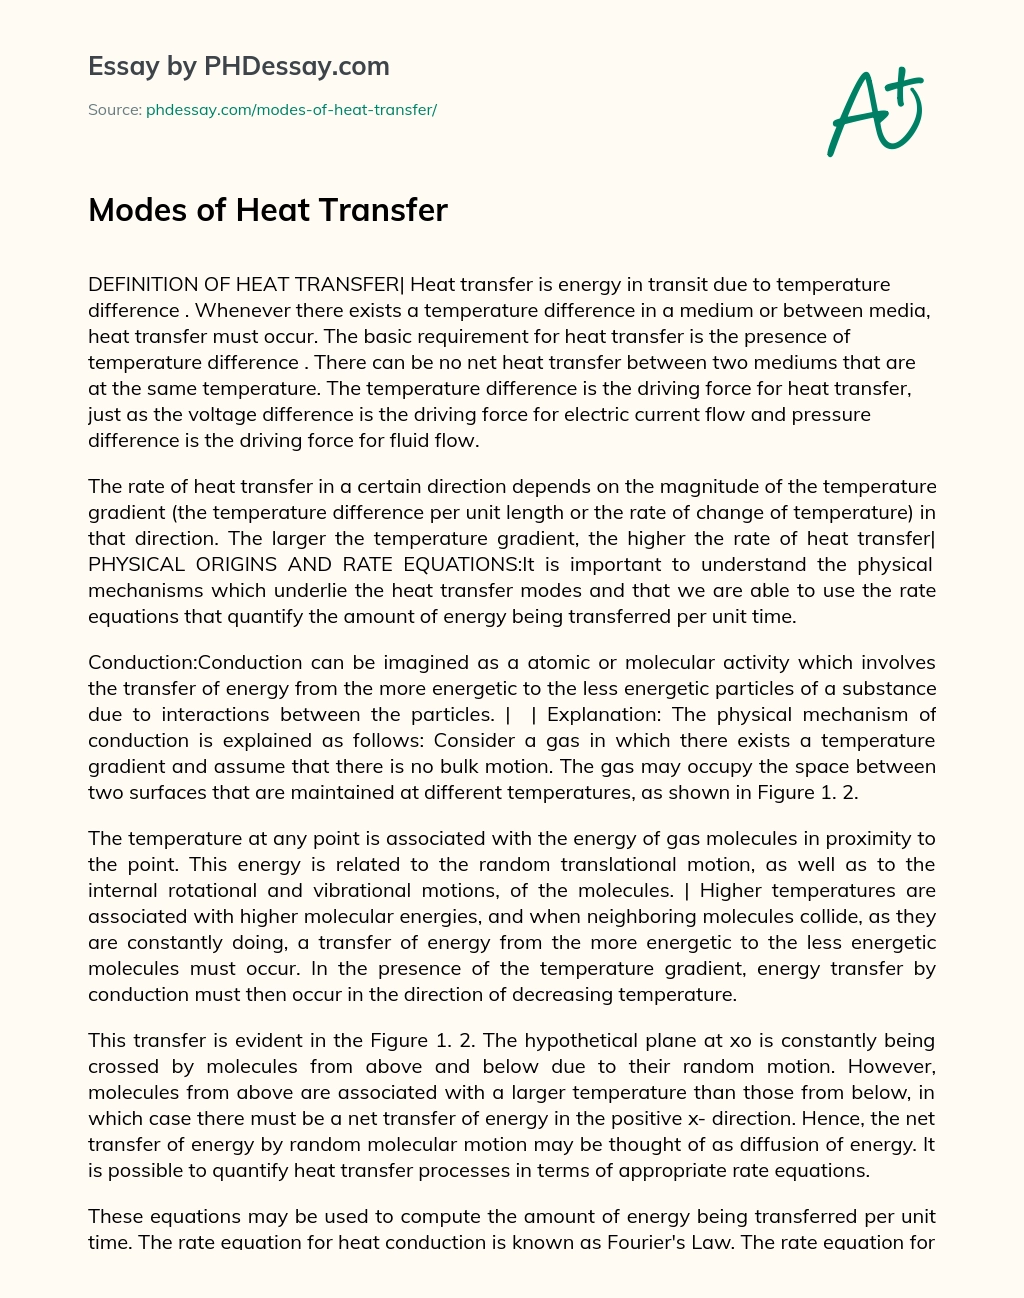 essay about transfer of heat